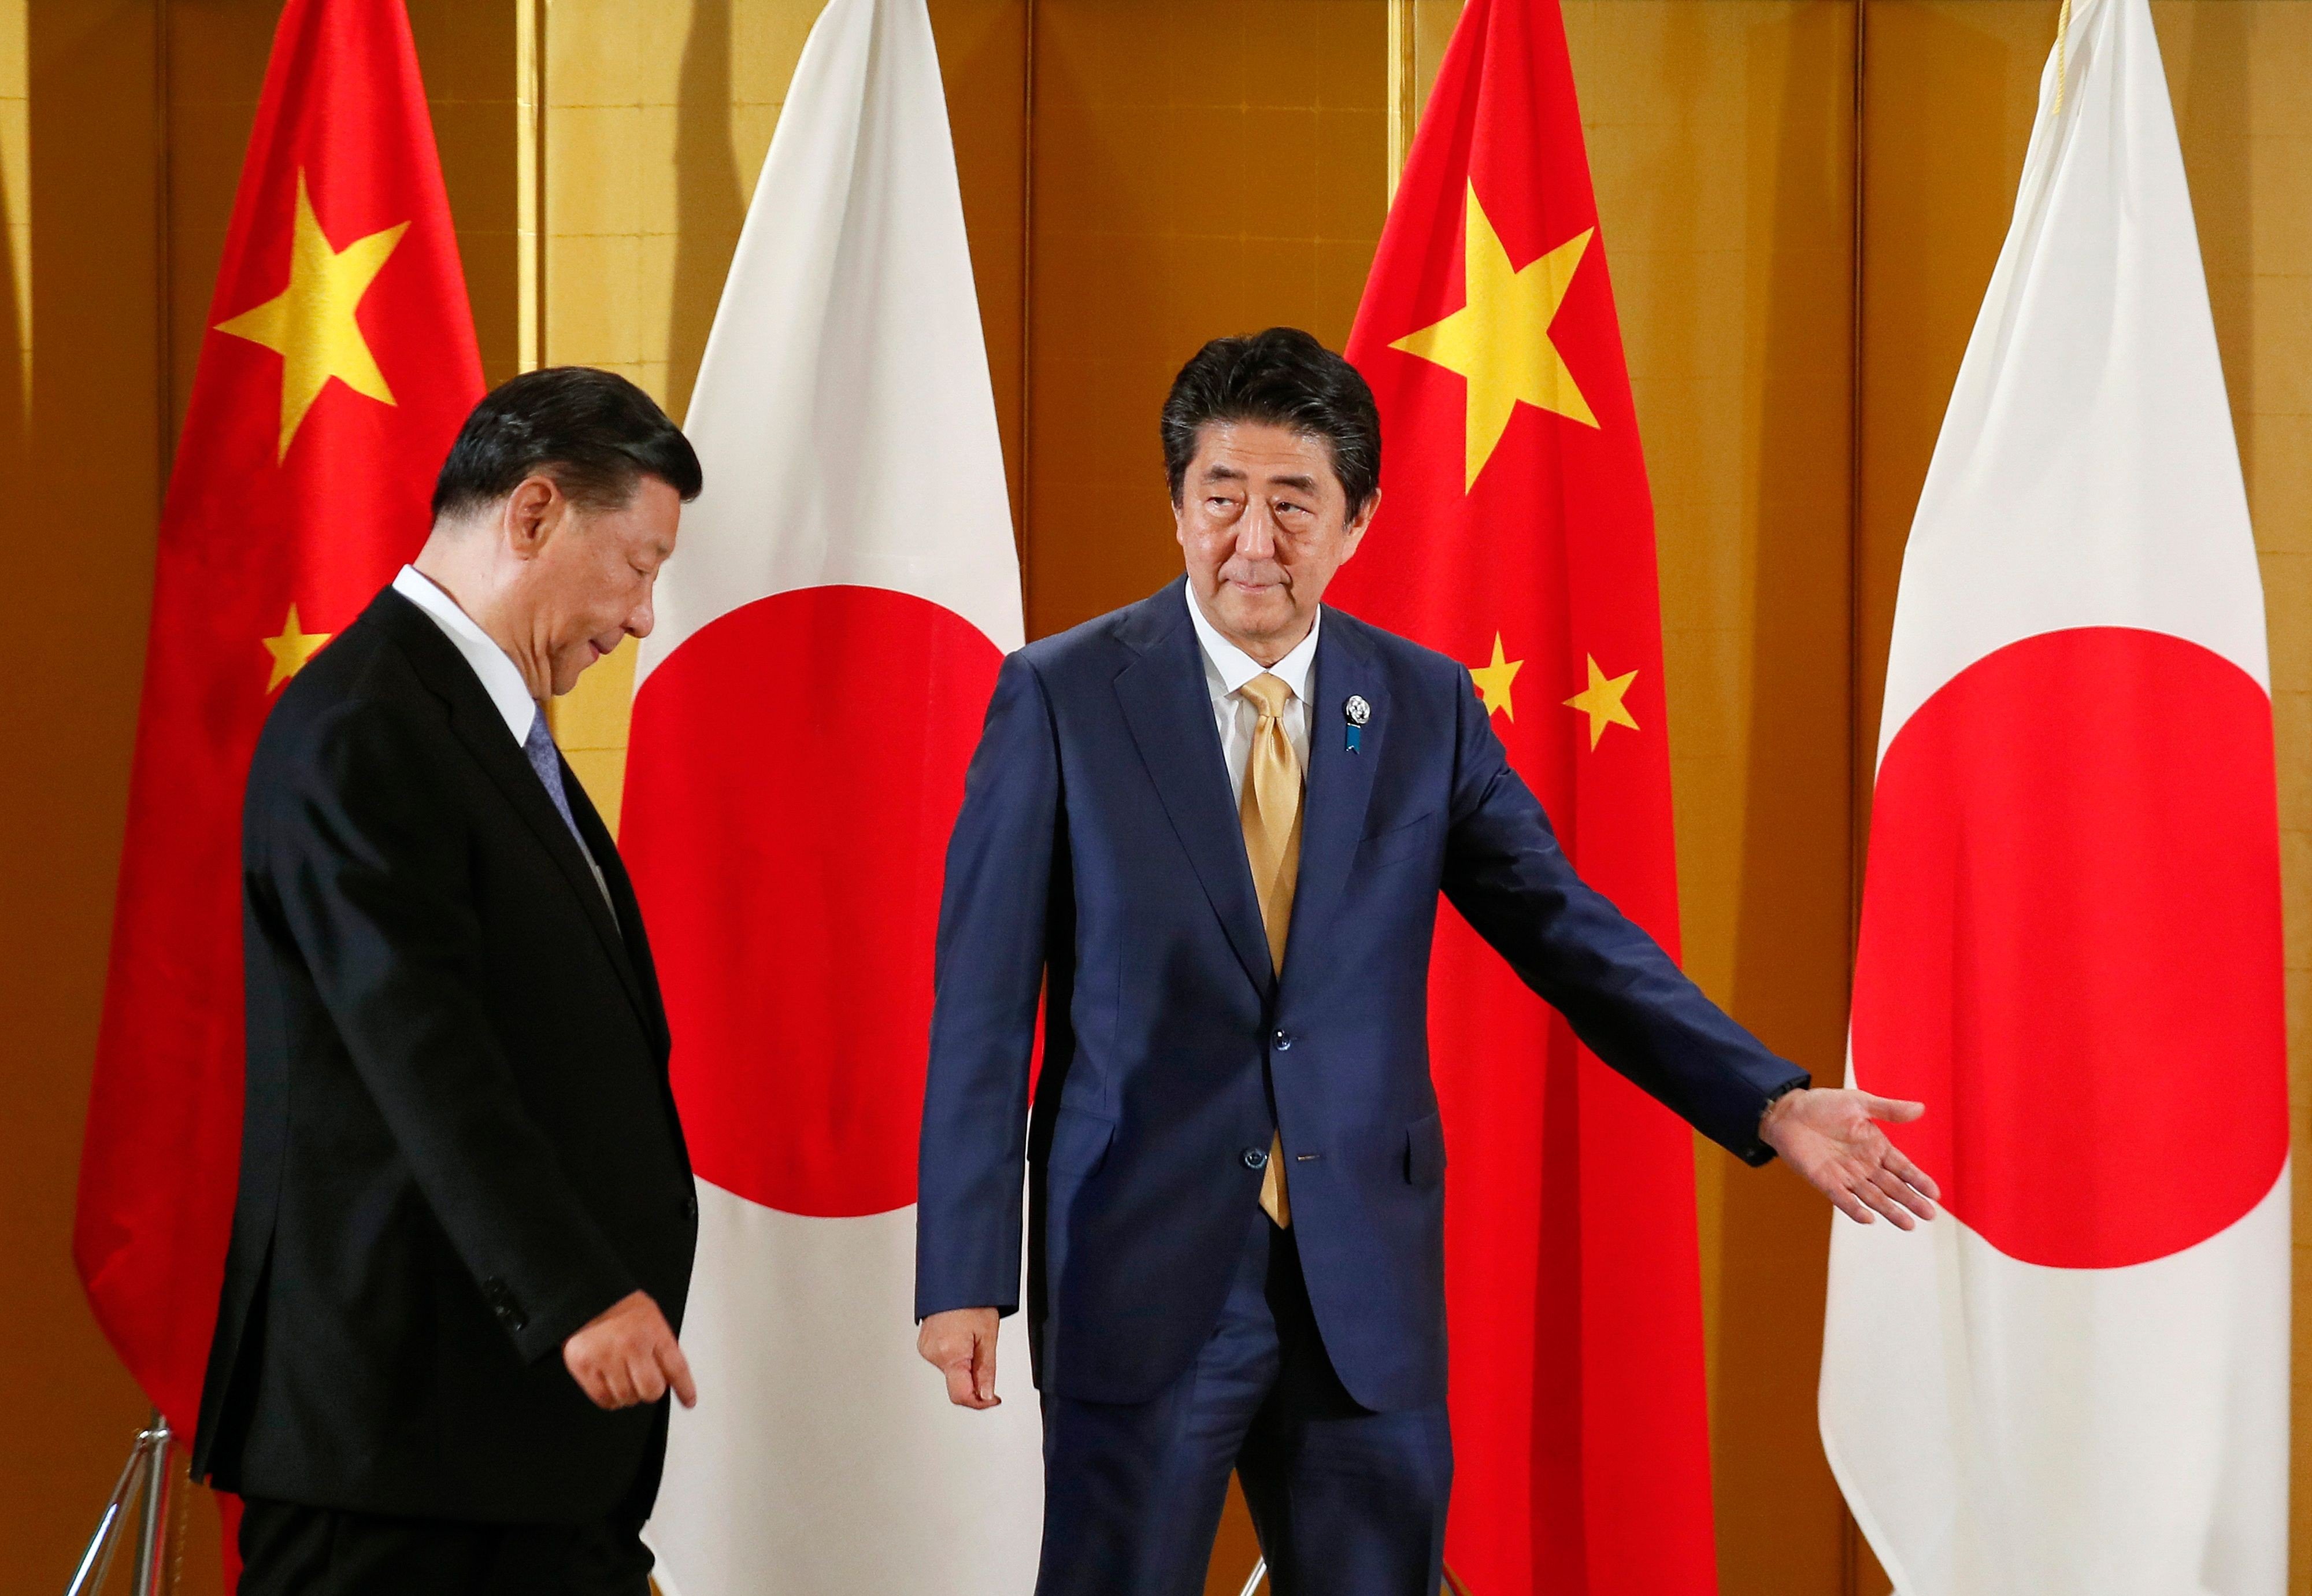 President Xi Jinping (left) with Prime Minister Shinzo Abe at the start of their talks in Osaka. Photo: AFP